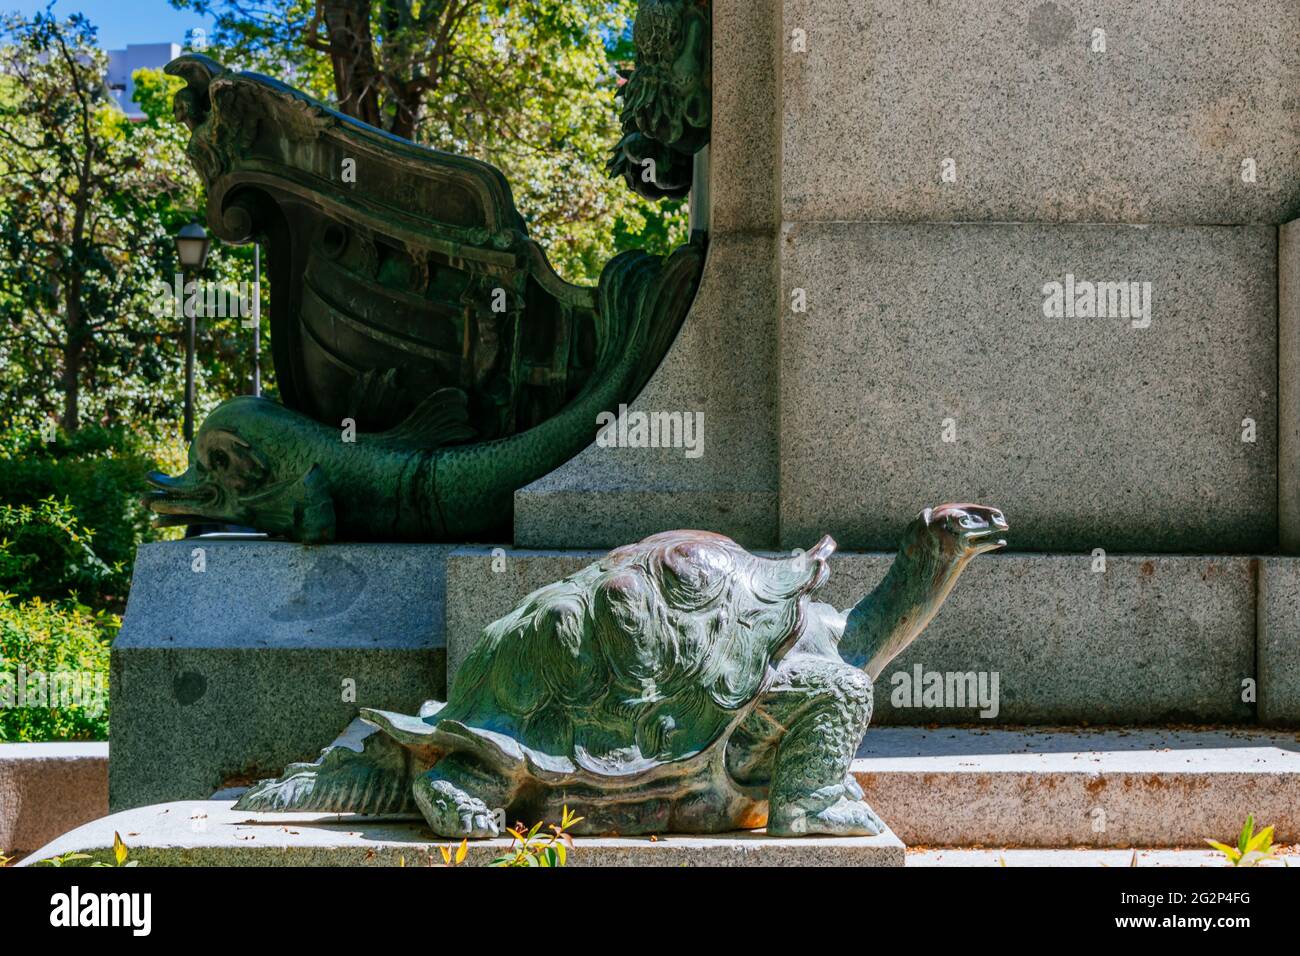 Detail, The tortoise. The fountain of Cuba was built in the first third of the 20th century as a commemorative monument to the Republic of Cuba. The B Stock Photo